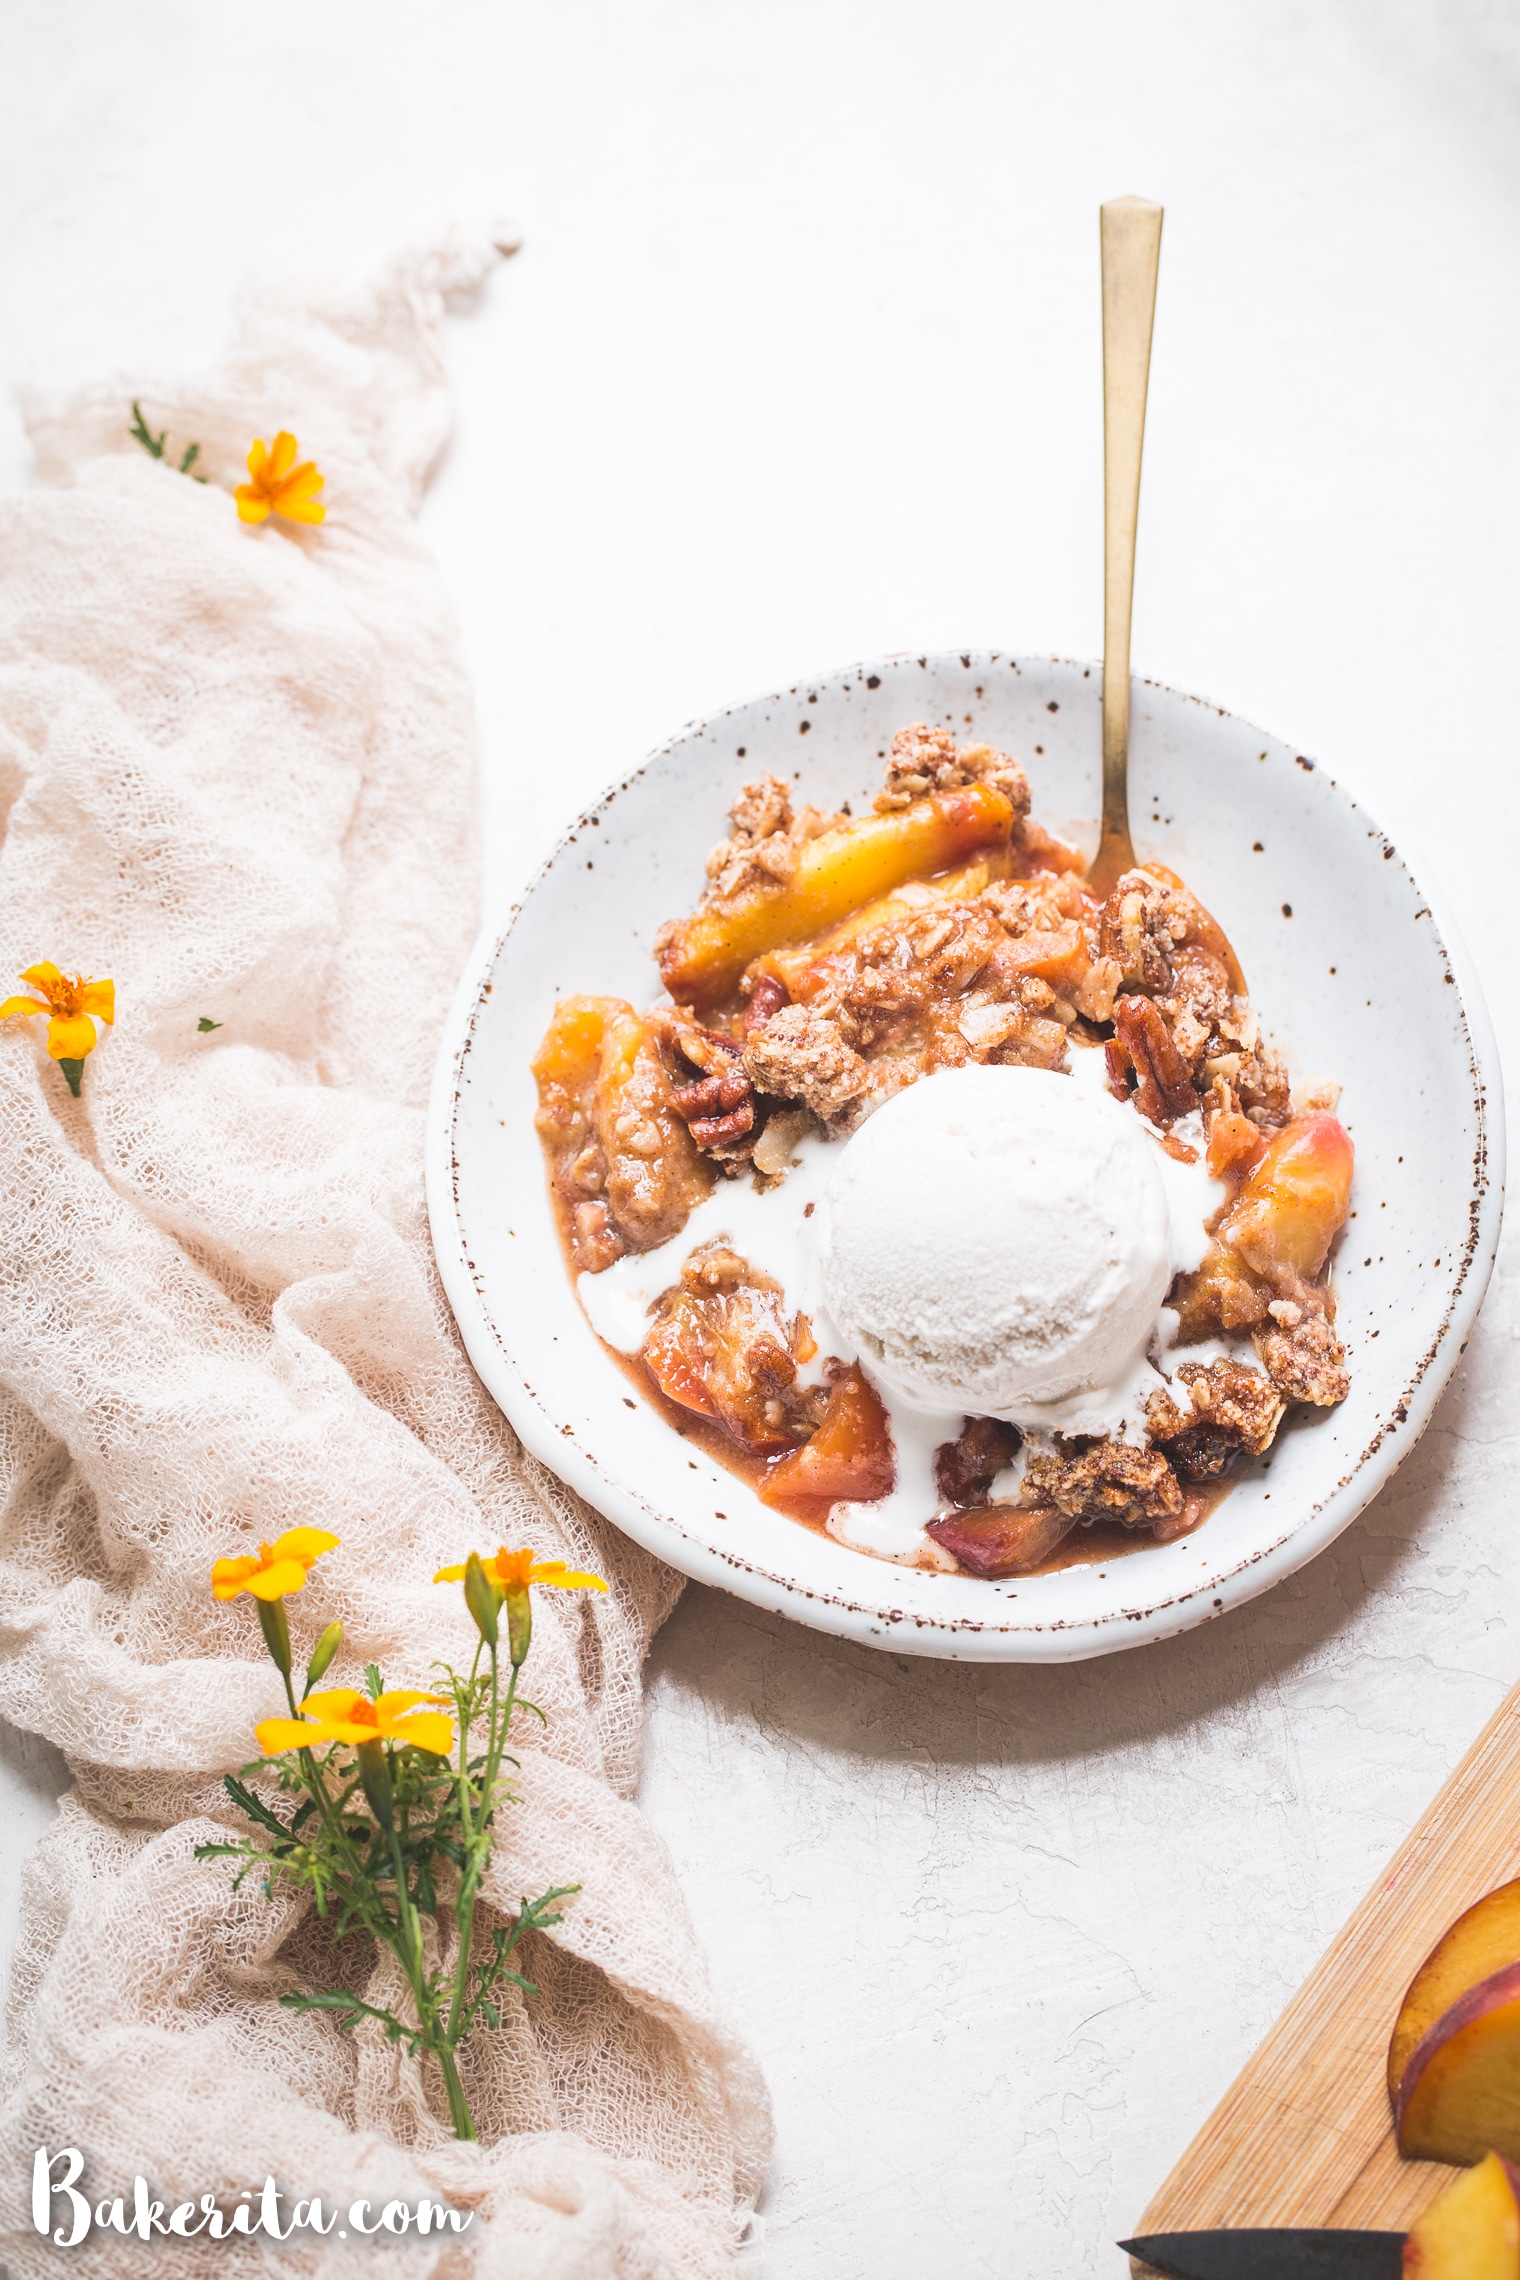 This Gluten-Free & Vegan Peach Crisp recipe is a healthy summer staple! The fresh peaches are baked until bubbling and perfectly complemented by the pecan oatmeal topping. Top with a scoop of ice cream for the perfect dessert or with plain yogurt for a healthy breakfast.